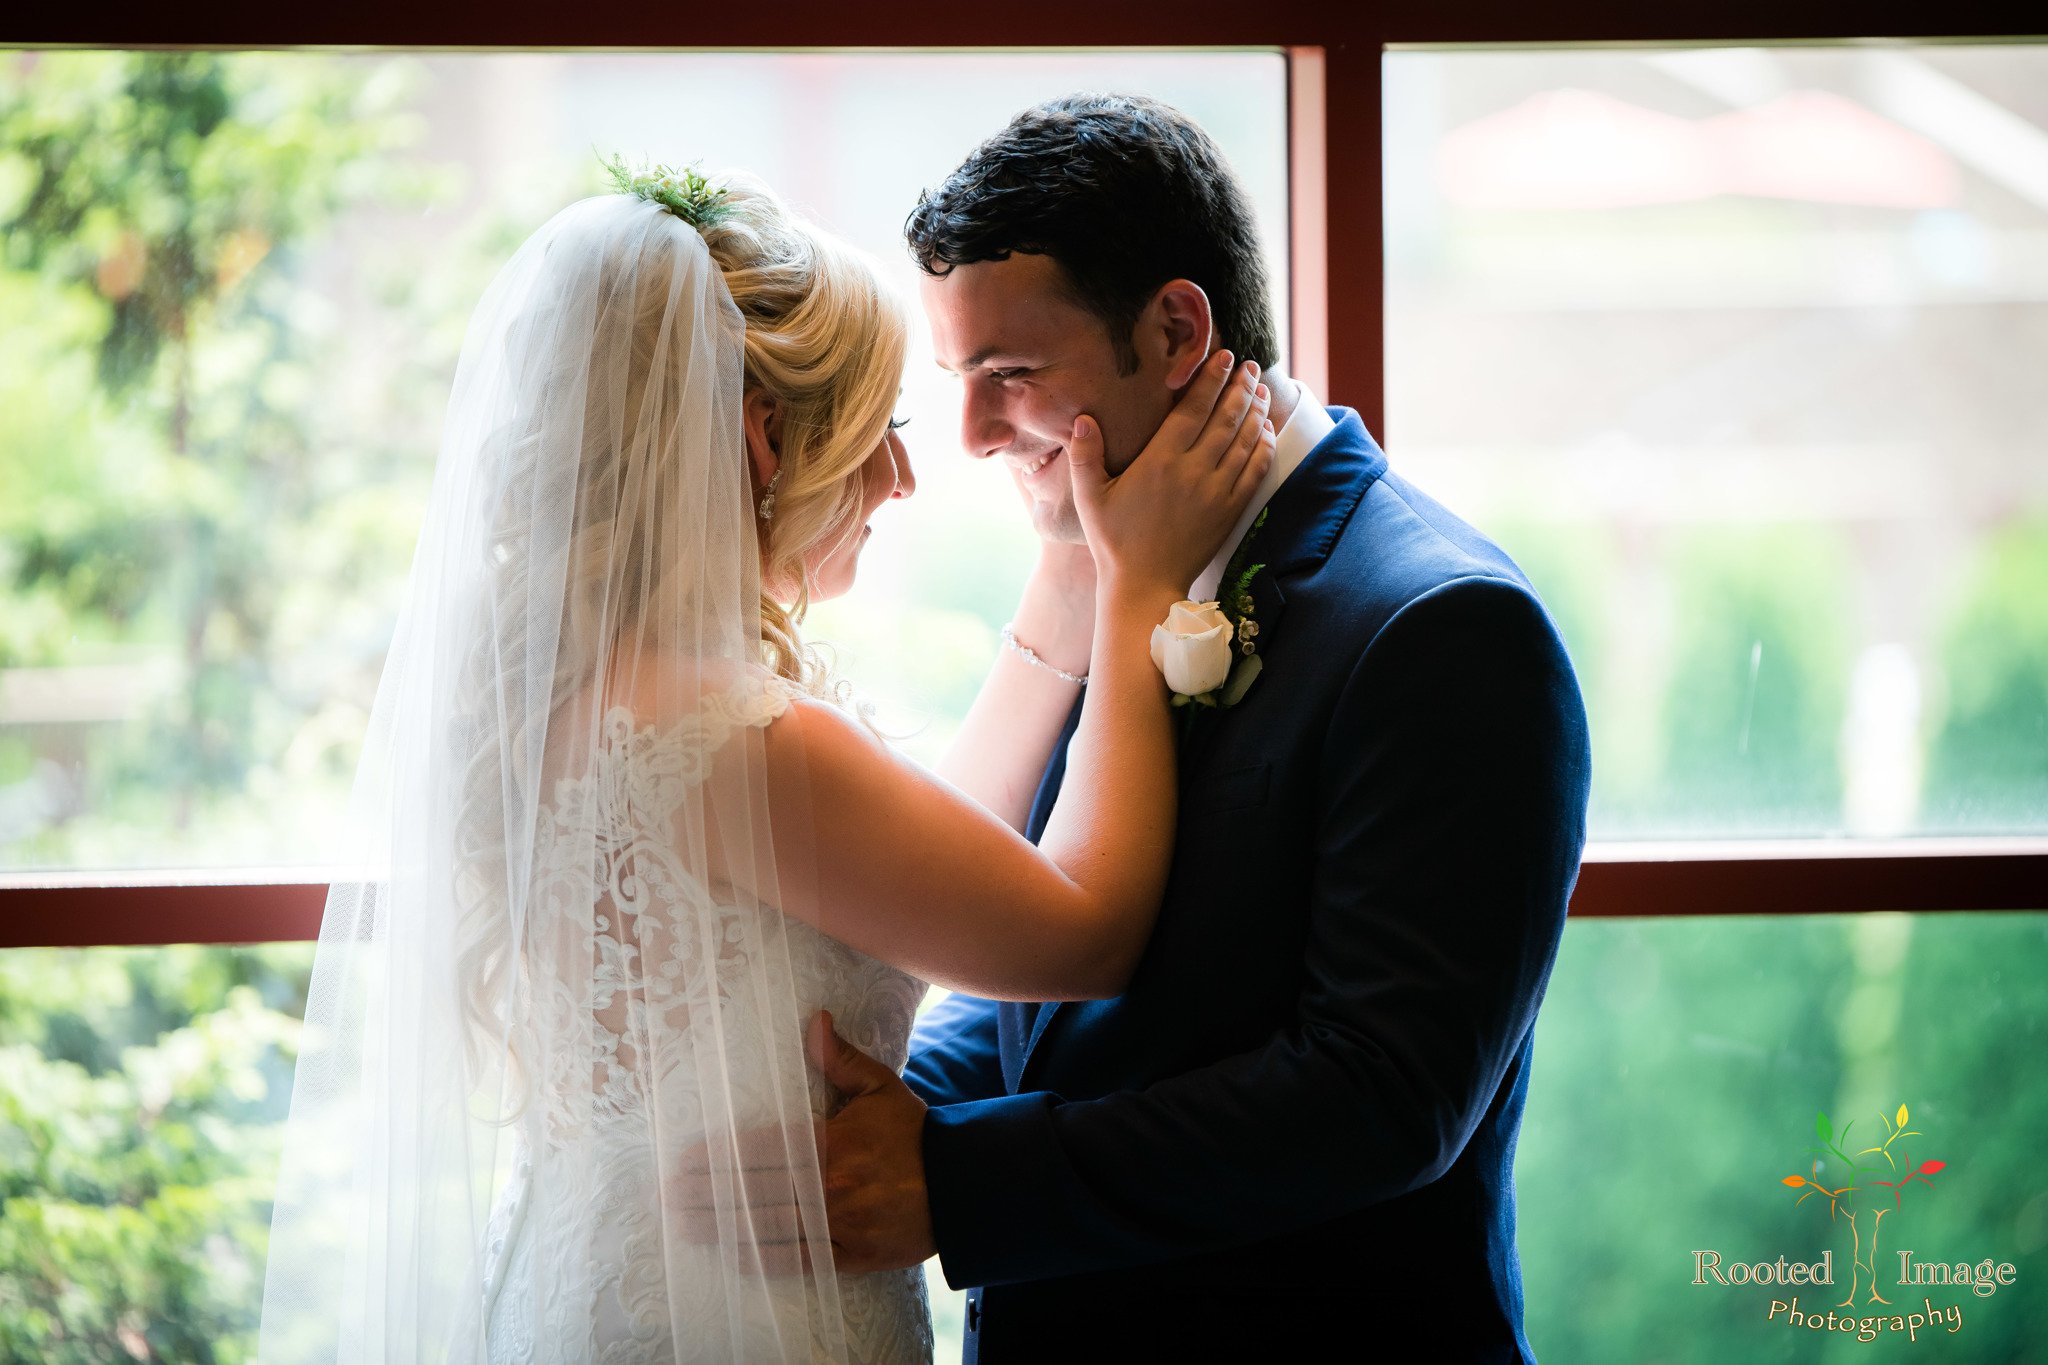 Lehigh Valley Wedding by DPNAK Events and Rooted Image Photography